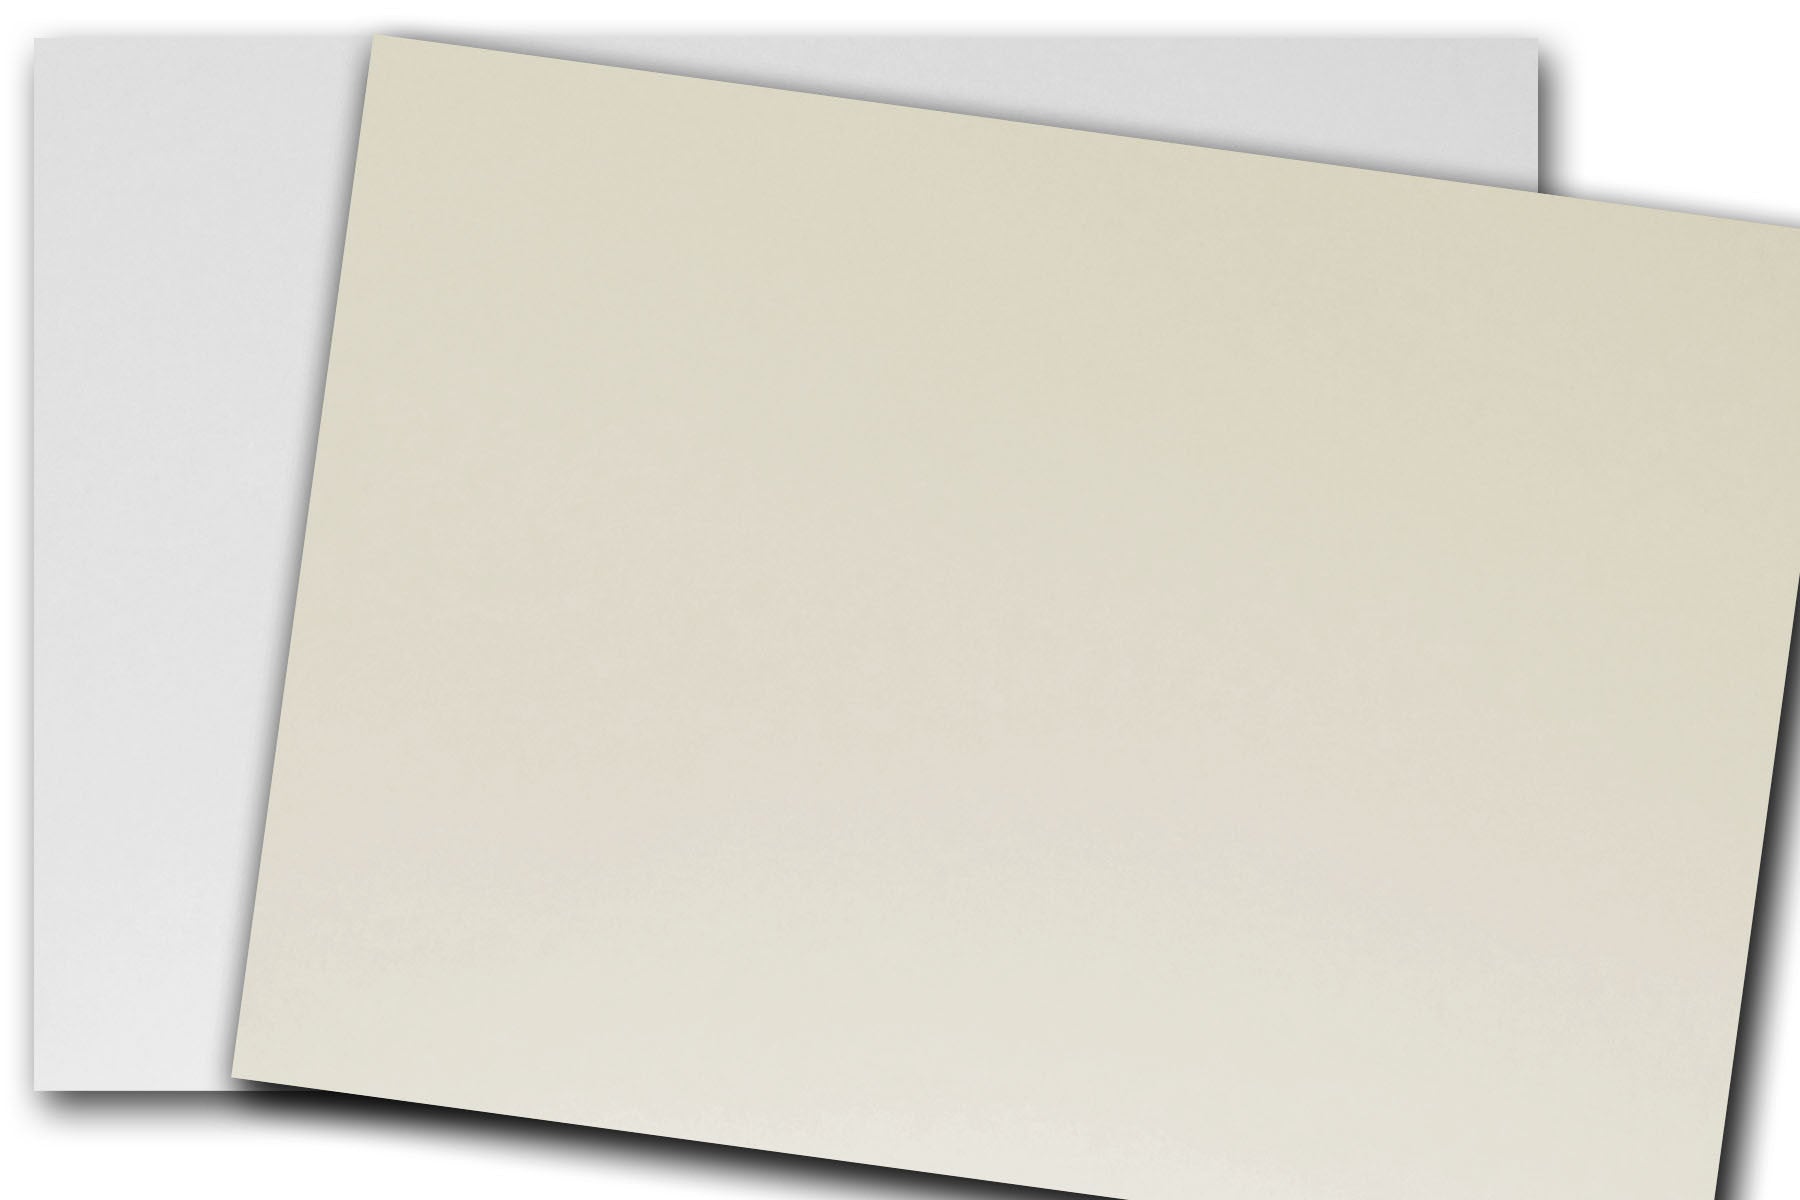 Classic Natural White Paper - 12 x 18 in 80 lb Text Smooth